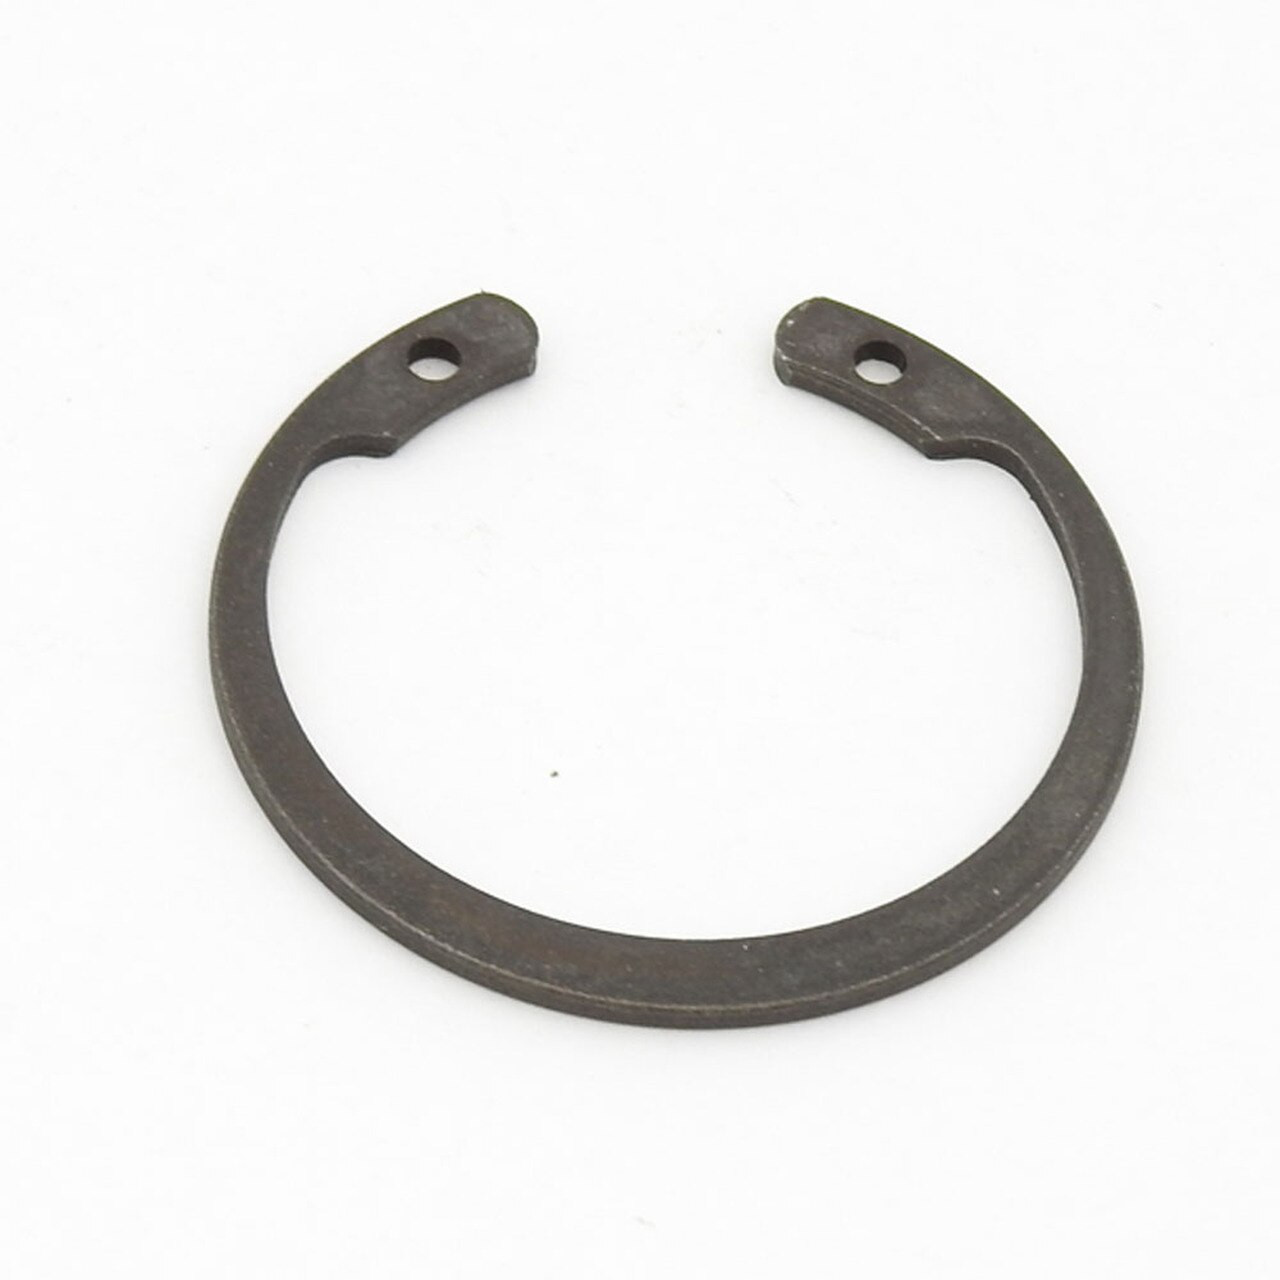 Excision Tabbed Retaining Circlip for Coolant Seal